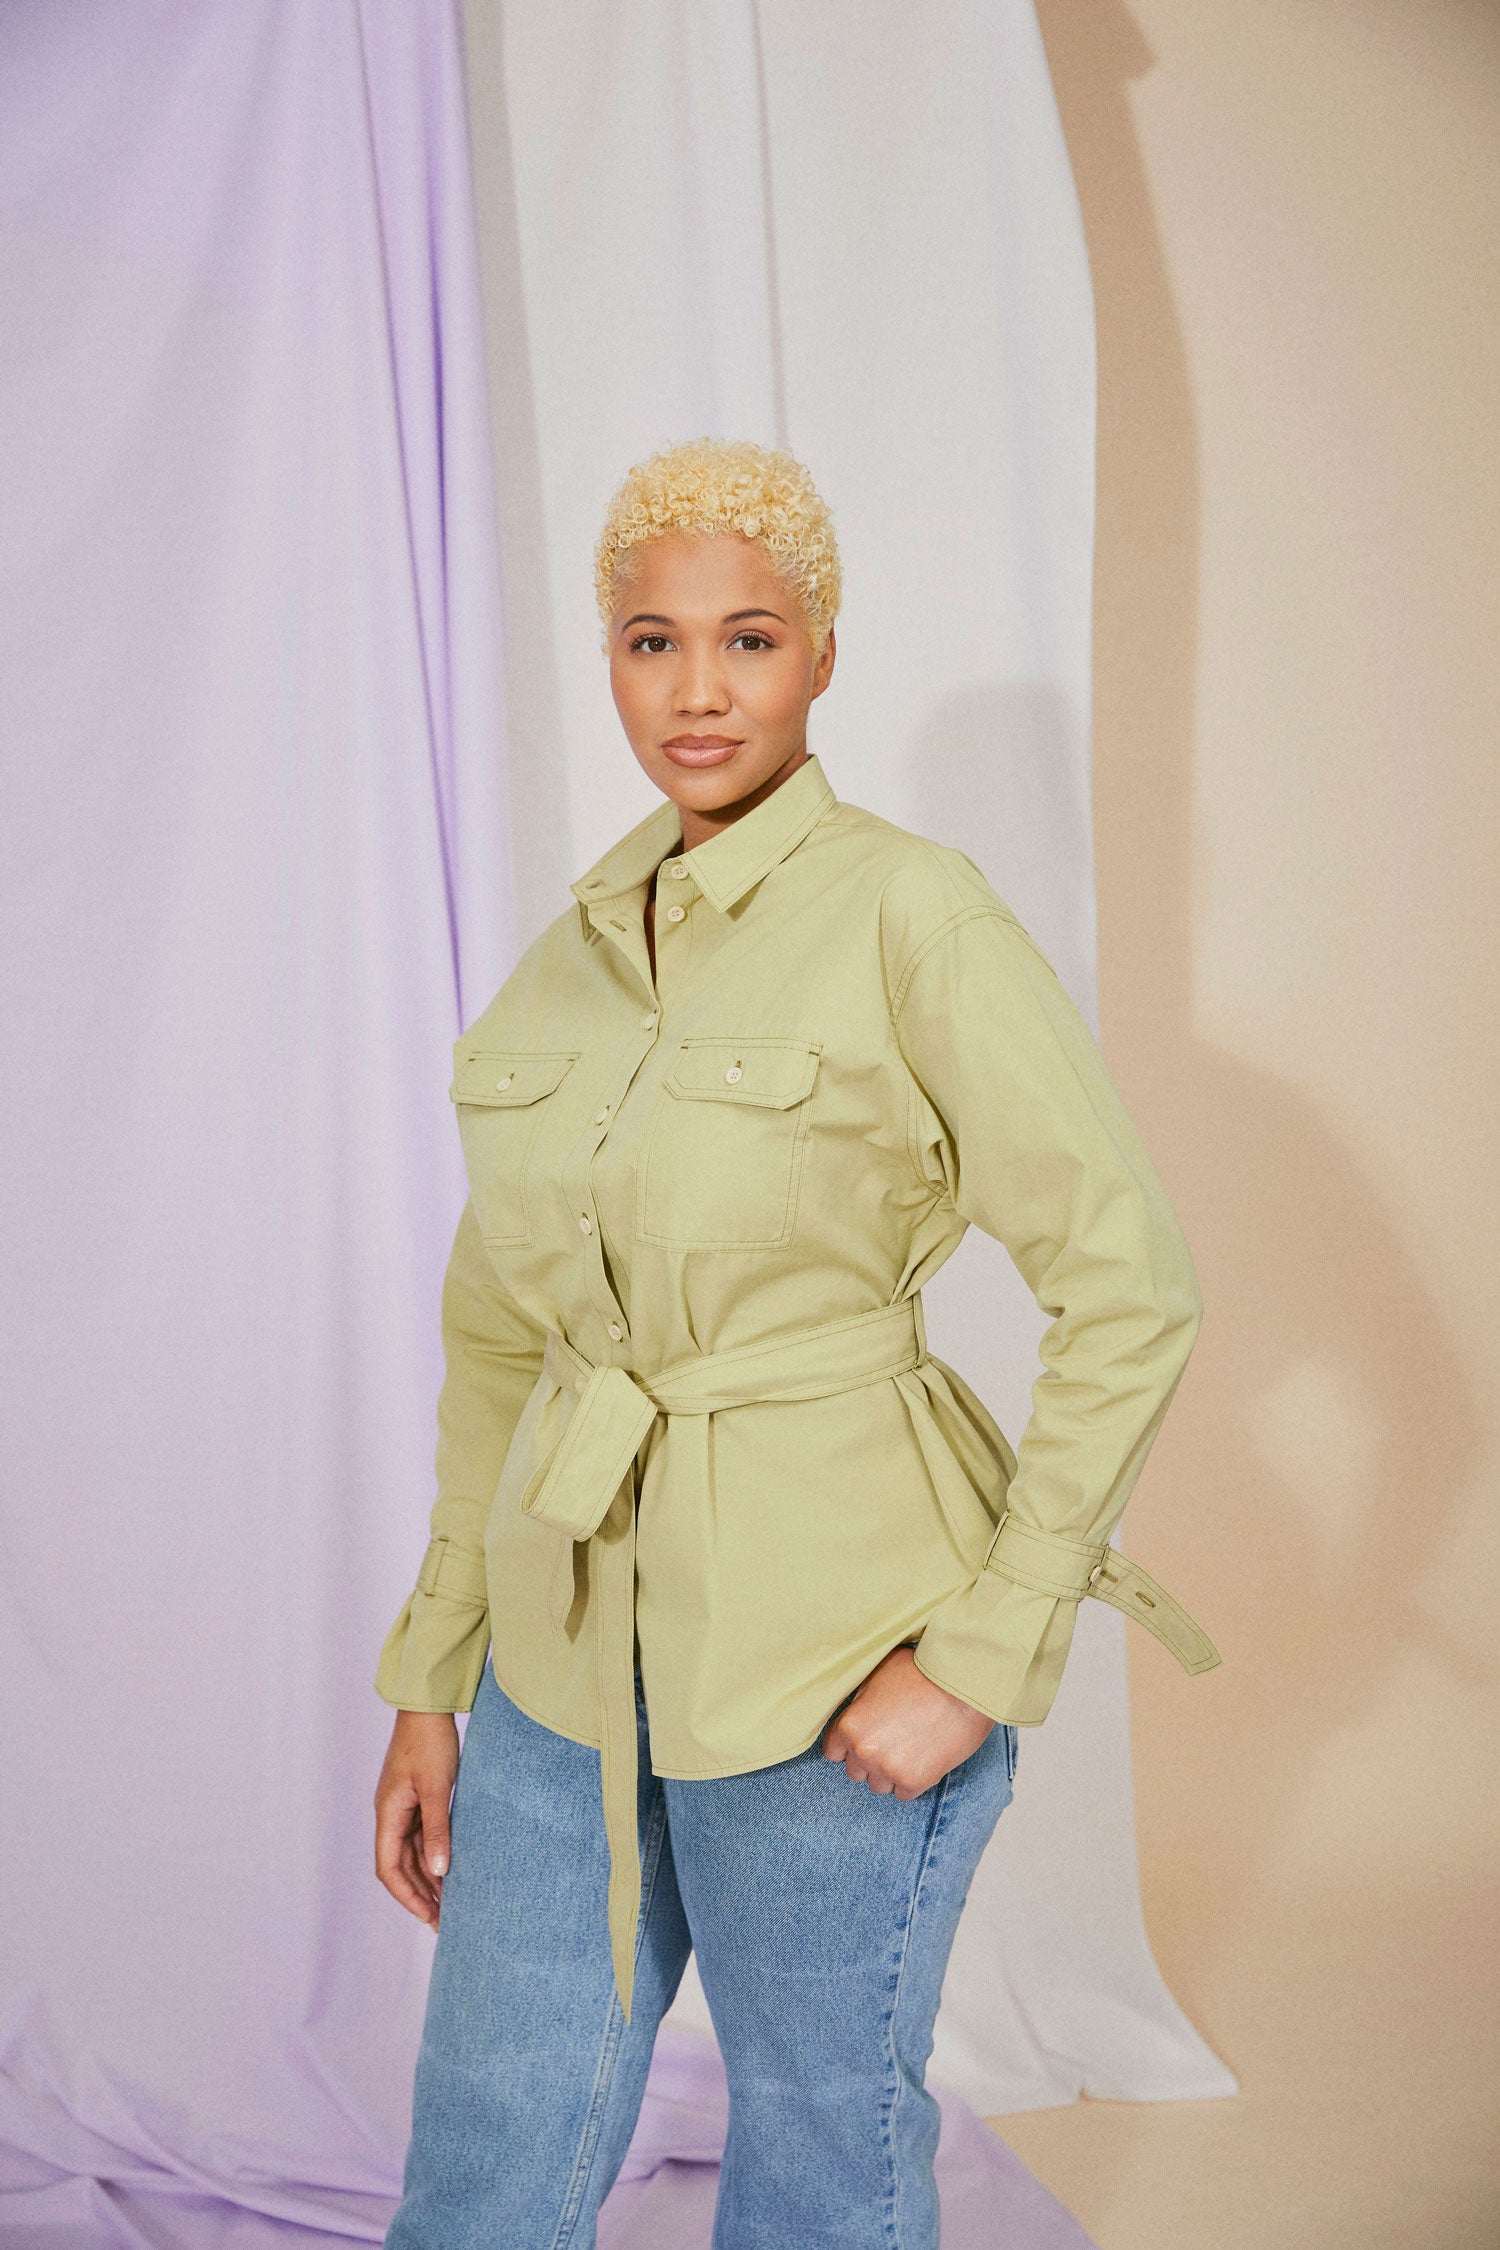 Womens olive green shirt: Saywood Zadie Boyfriend Shirt in olive deadstock cotton. Model has the belt tied round her waist with her hand in her pocket.